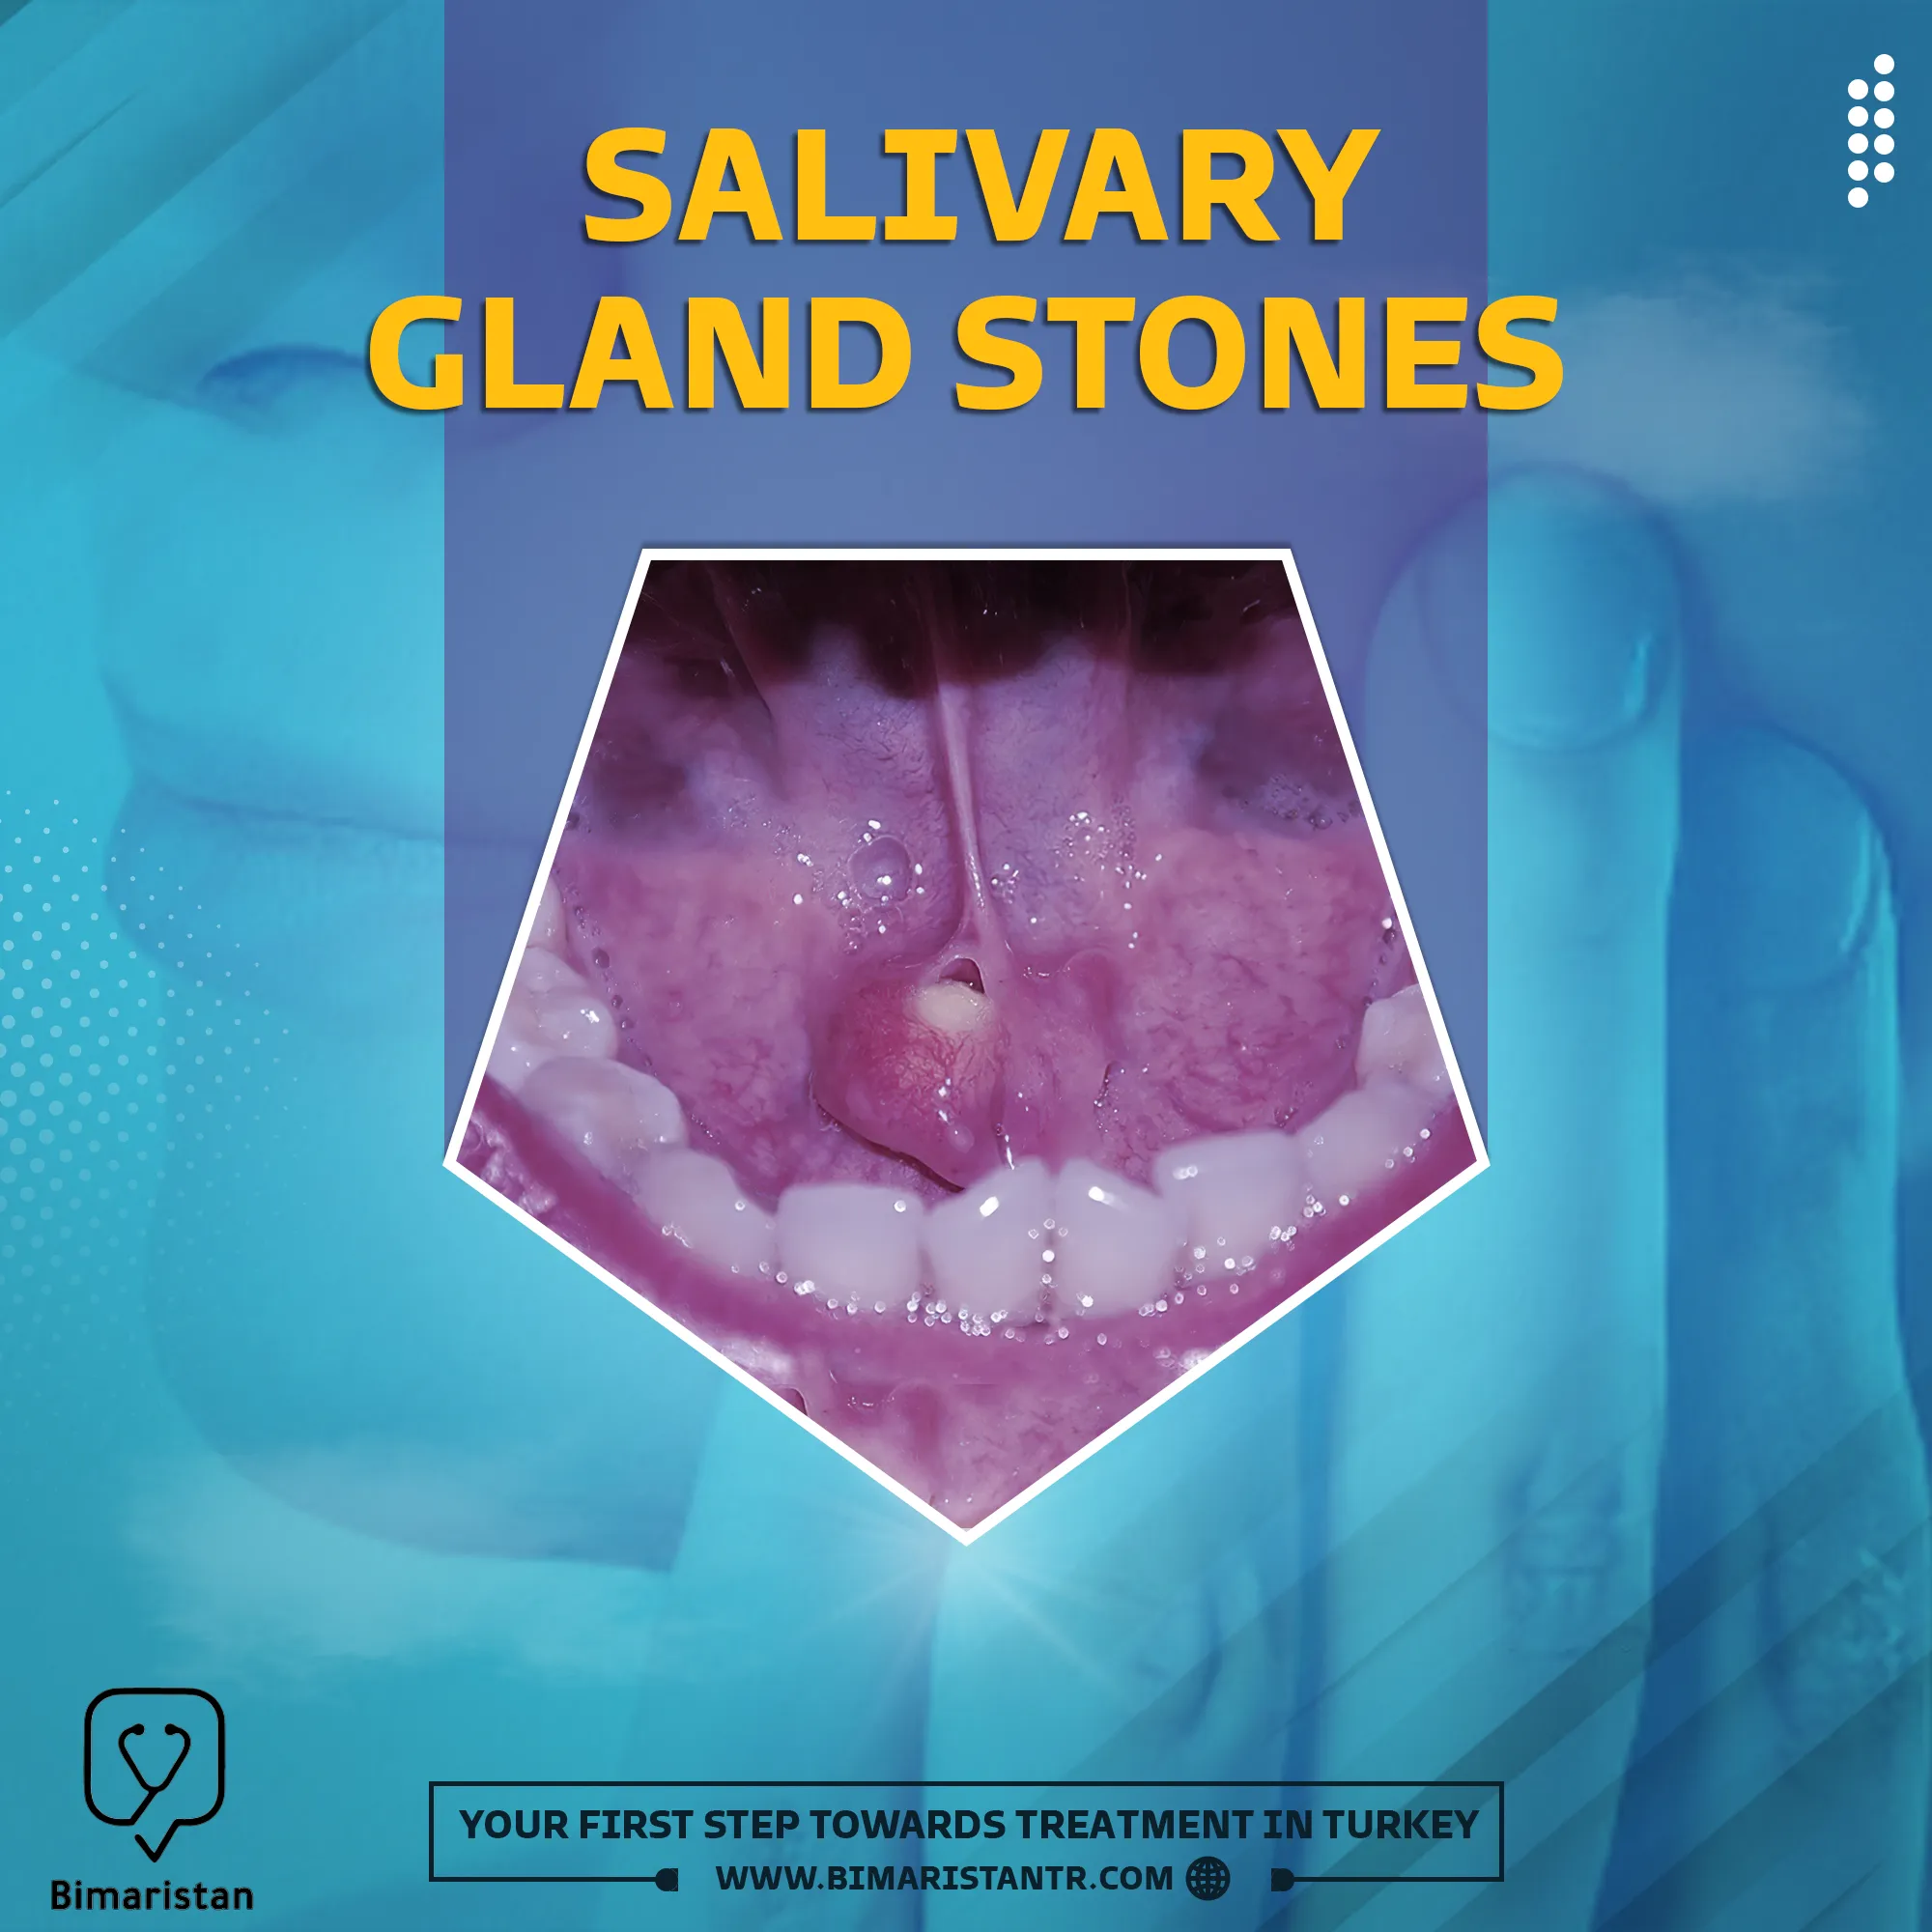 Causes, symptoms, and treatment of salivary gland stones